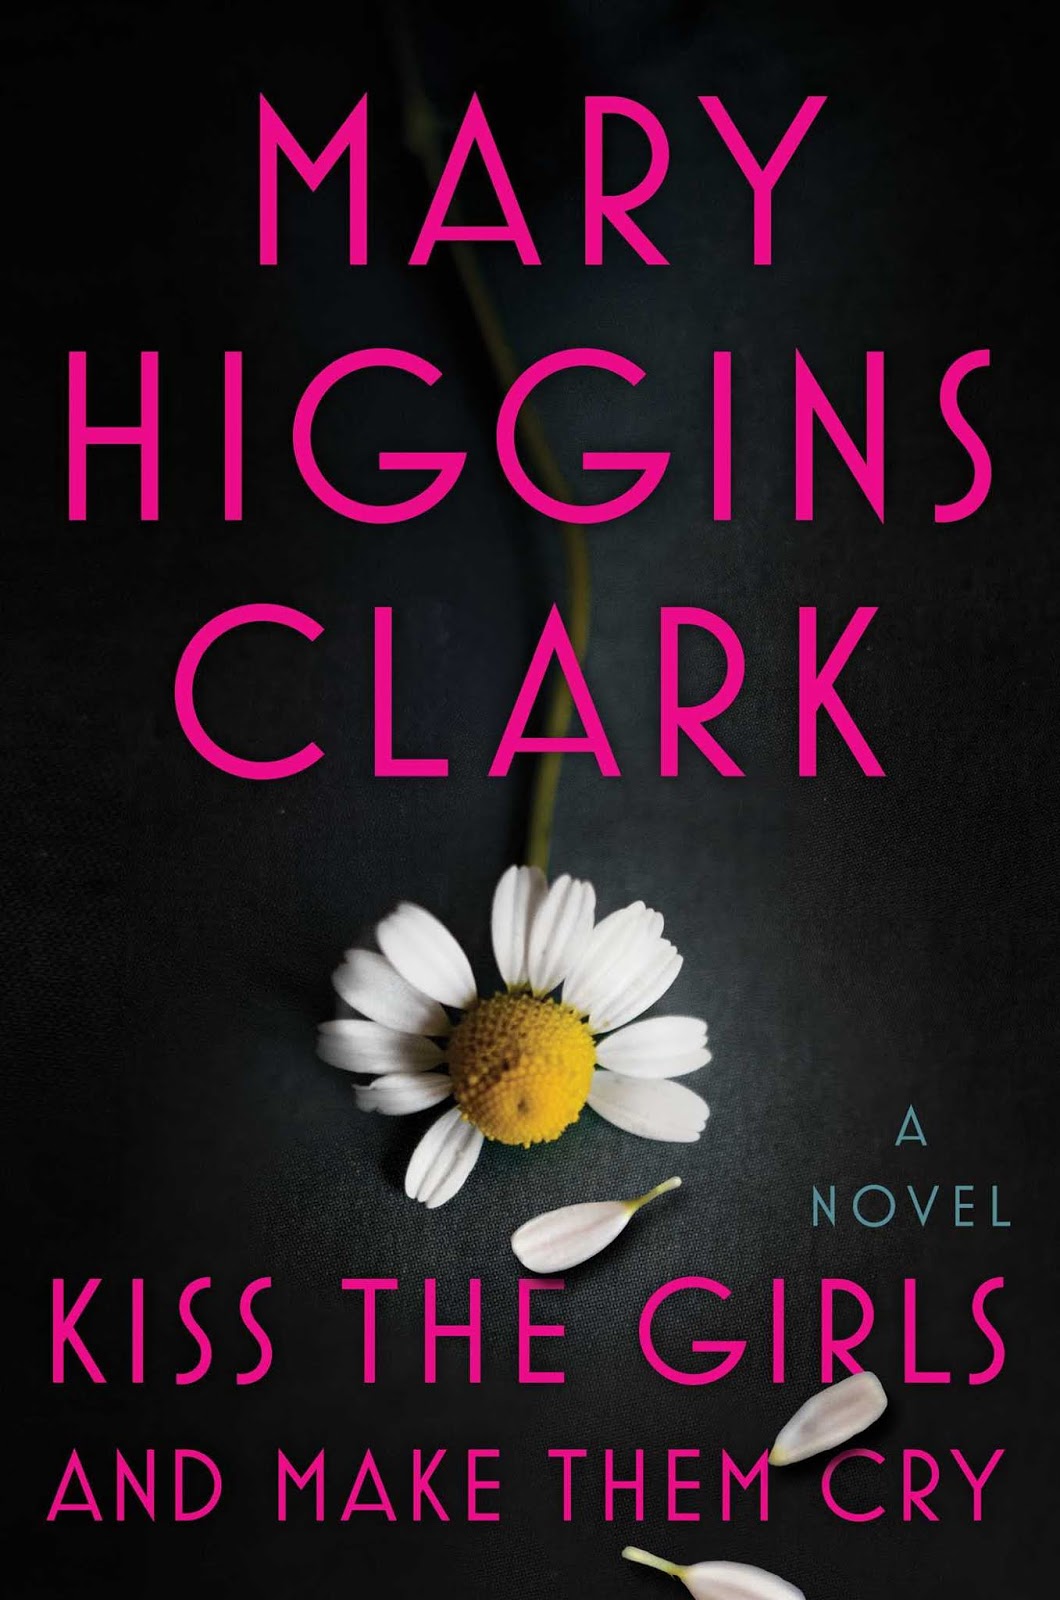 Short & Sweet Review: Kiss the Girls and Make Them Cry by Mary Higgins Clark